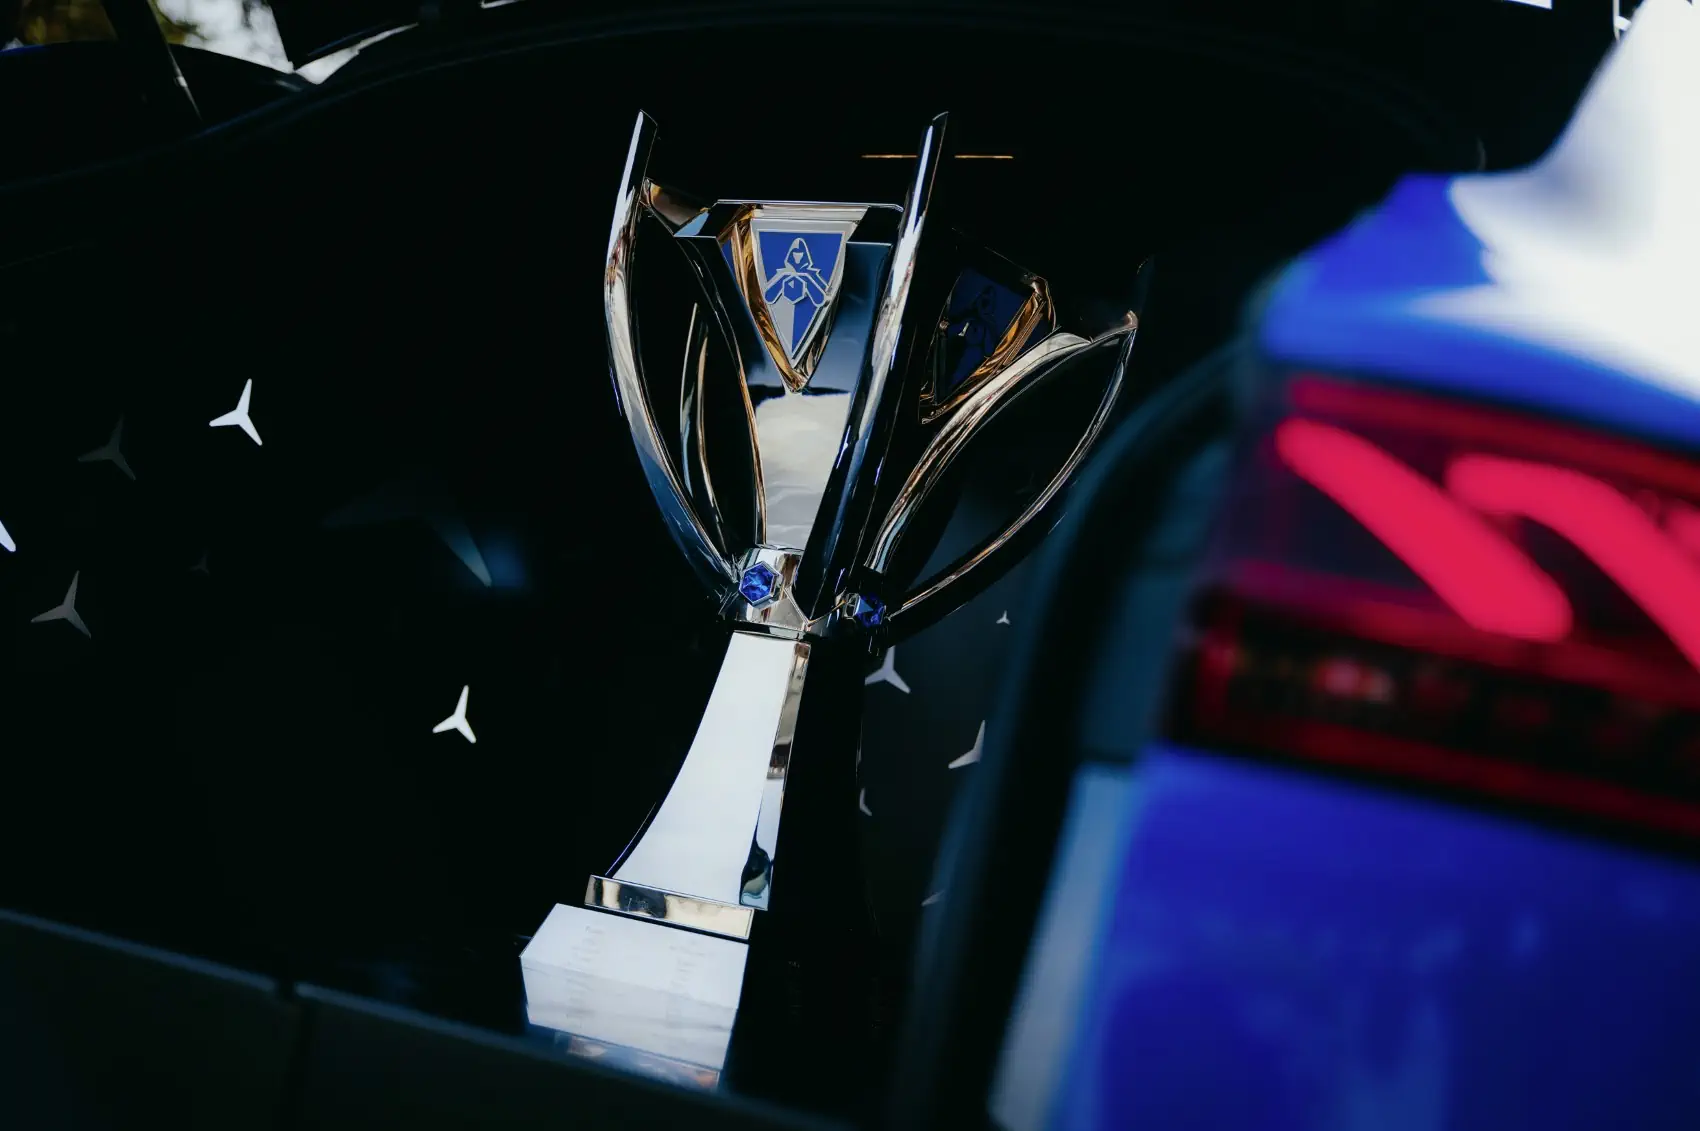 Mercedes-Benz EQS SUV is The Official "Trophy Carrier" of The Summoner’s Cup to League of Legends Worlds 2023 Finals